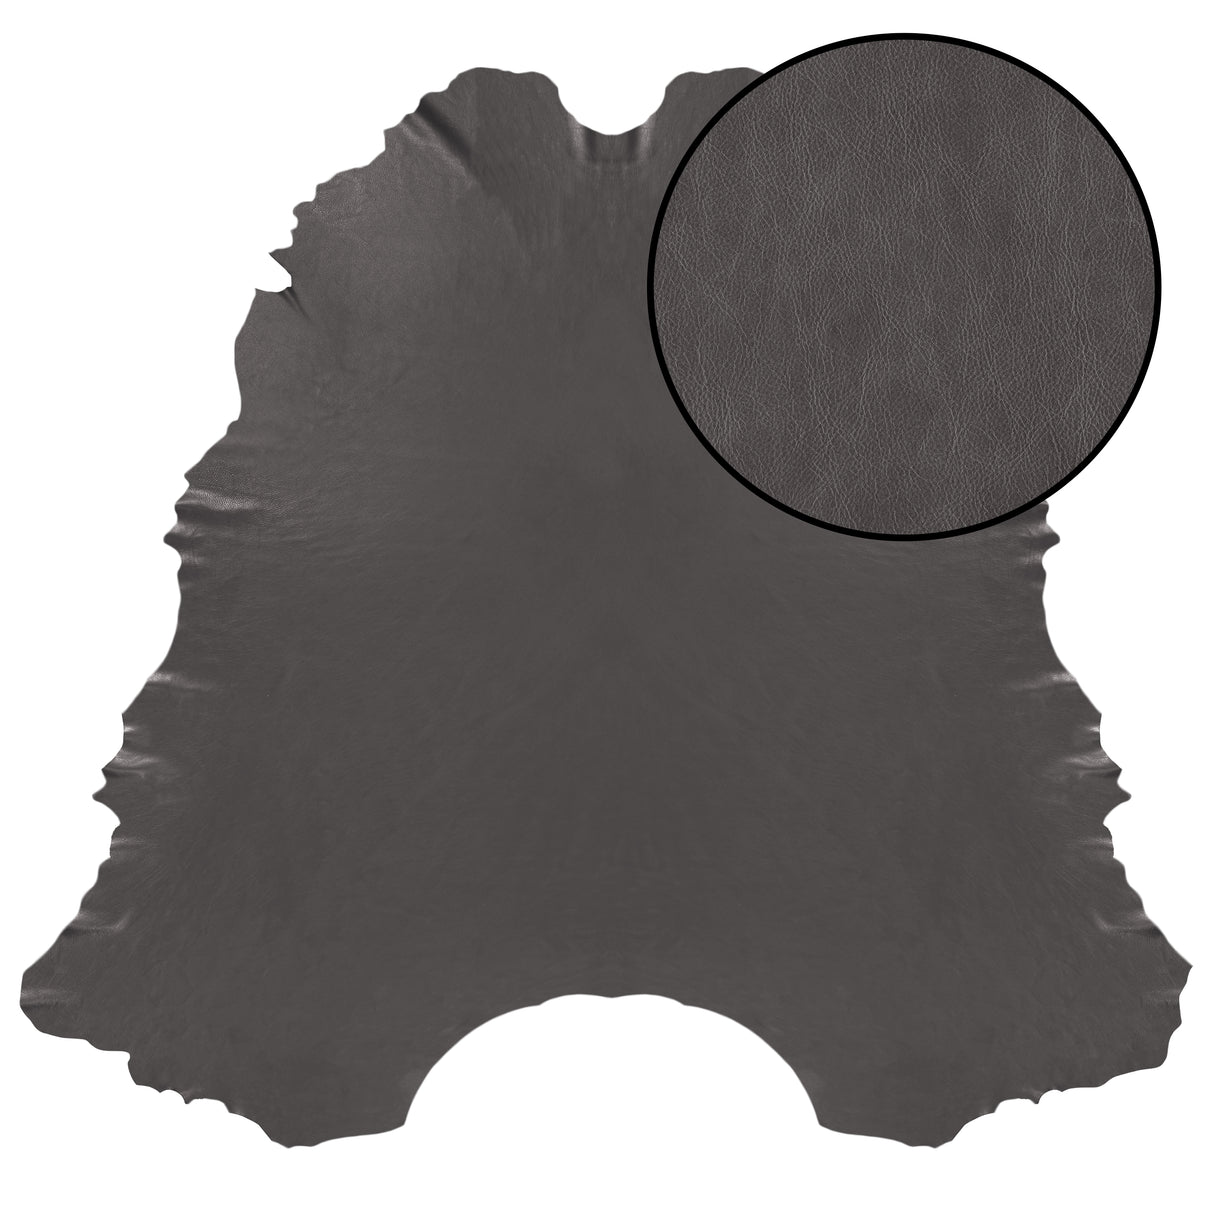 Plaid Gray - Highline Transitional Two Tone Collection - Whole Hide Upholstery Leather ($7.00/SqFt)